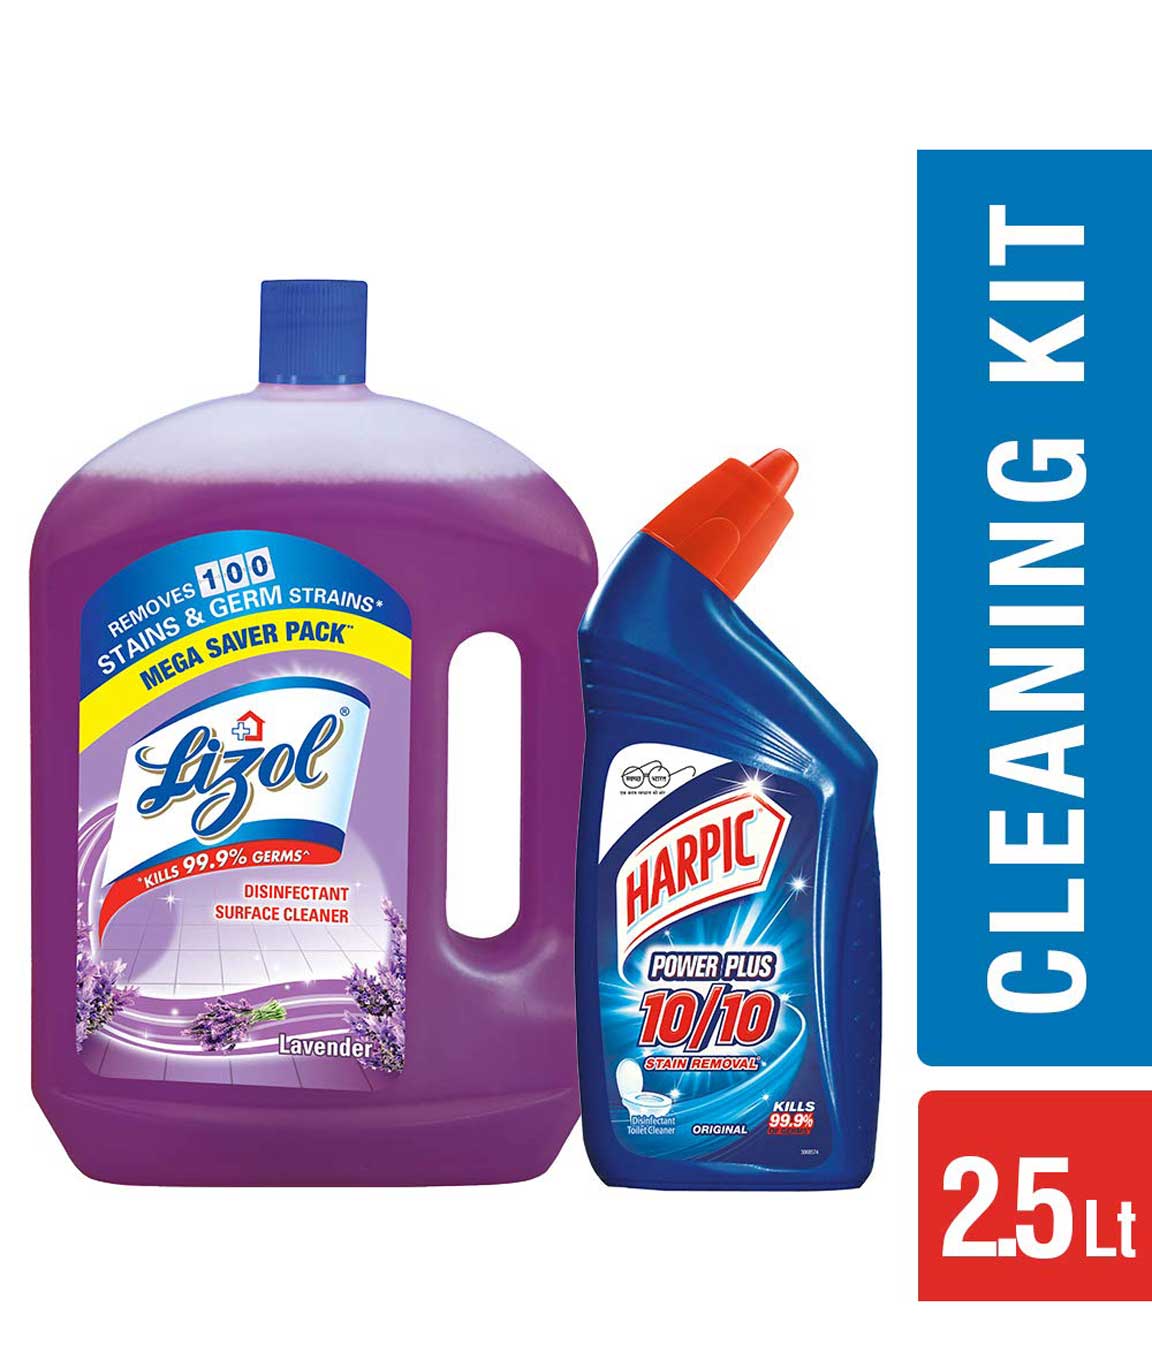 Lizol Disinfectant Floor Cleaner - 2000 ml (Lavender) with Free Harpic - 500 ml